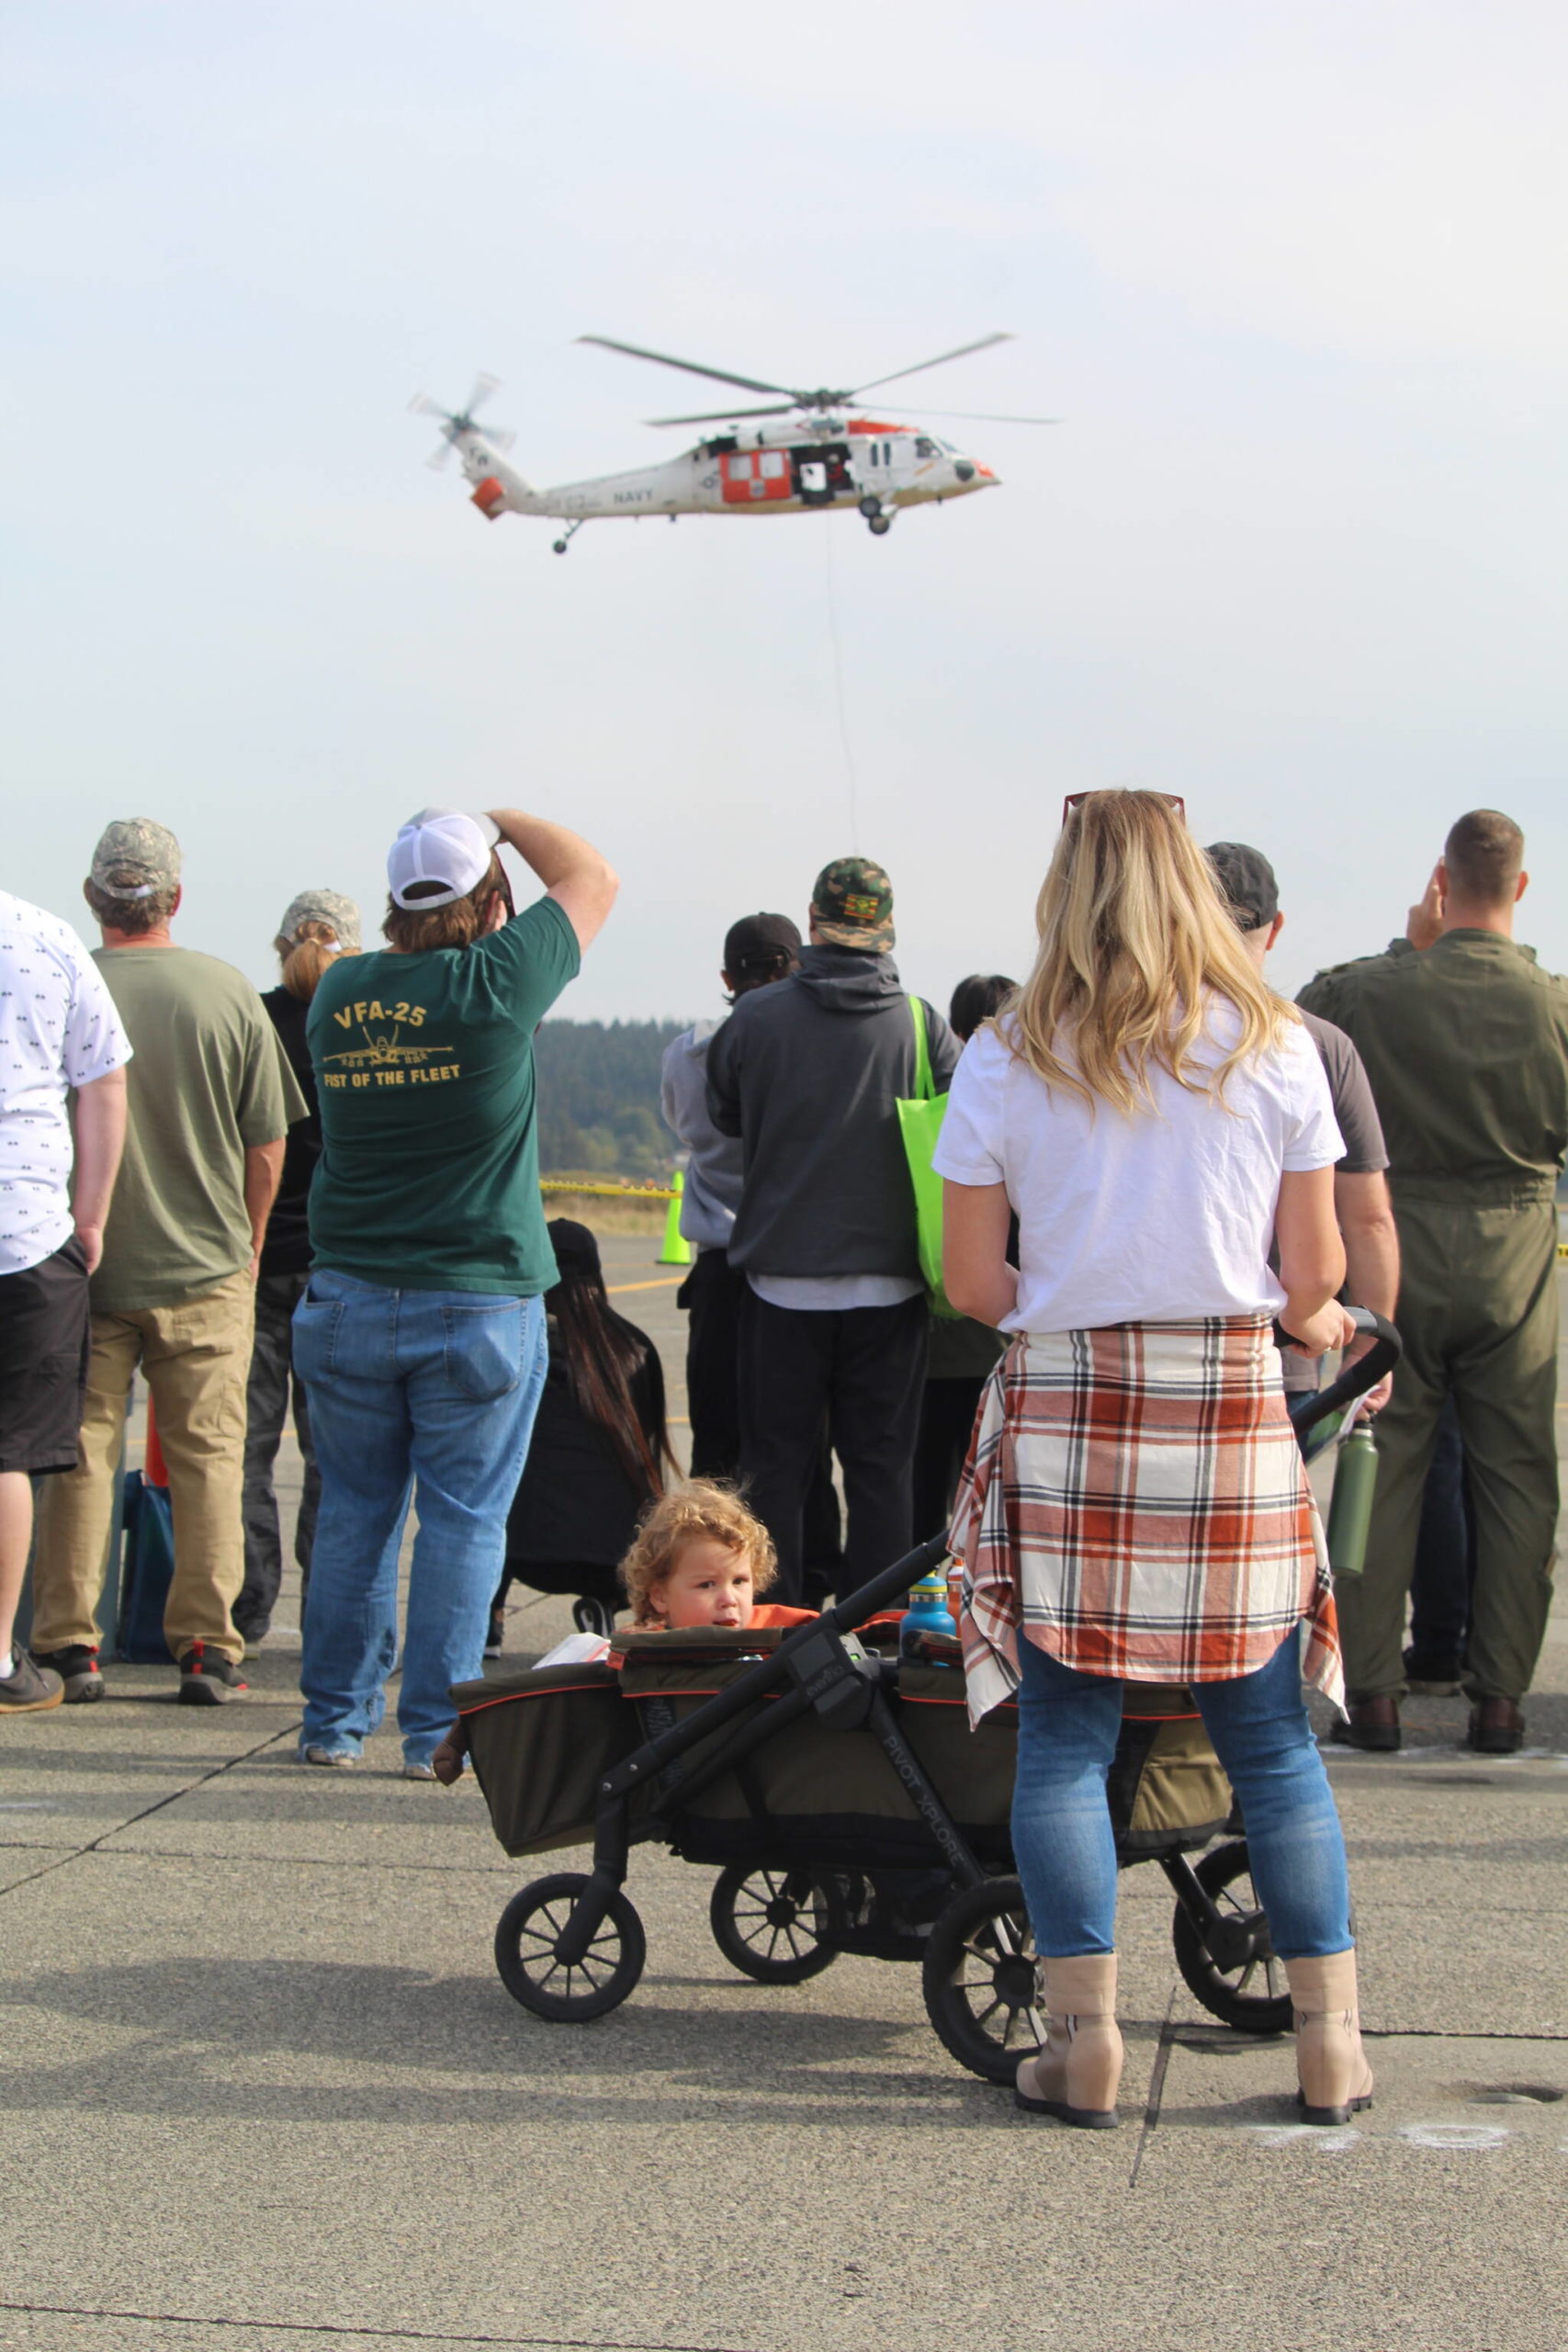 Photo by Karina Andrew/Whidbey News-Times
Base guests watch a Navy Search and Rescue demonstration during the open house Sept. 17.